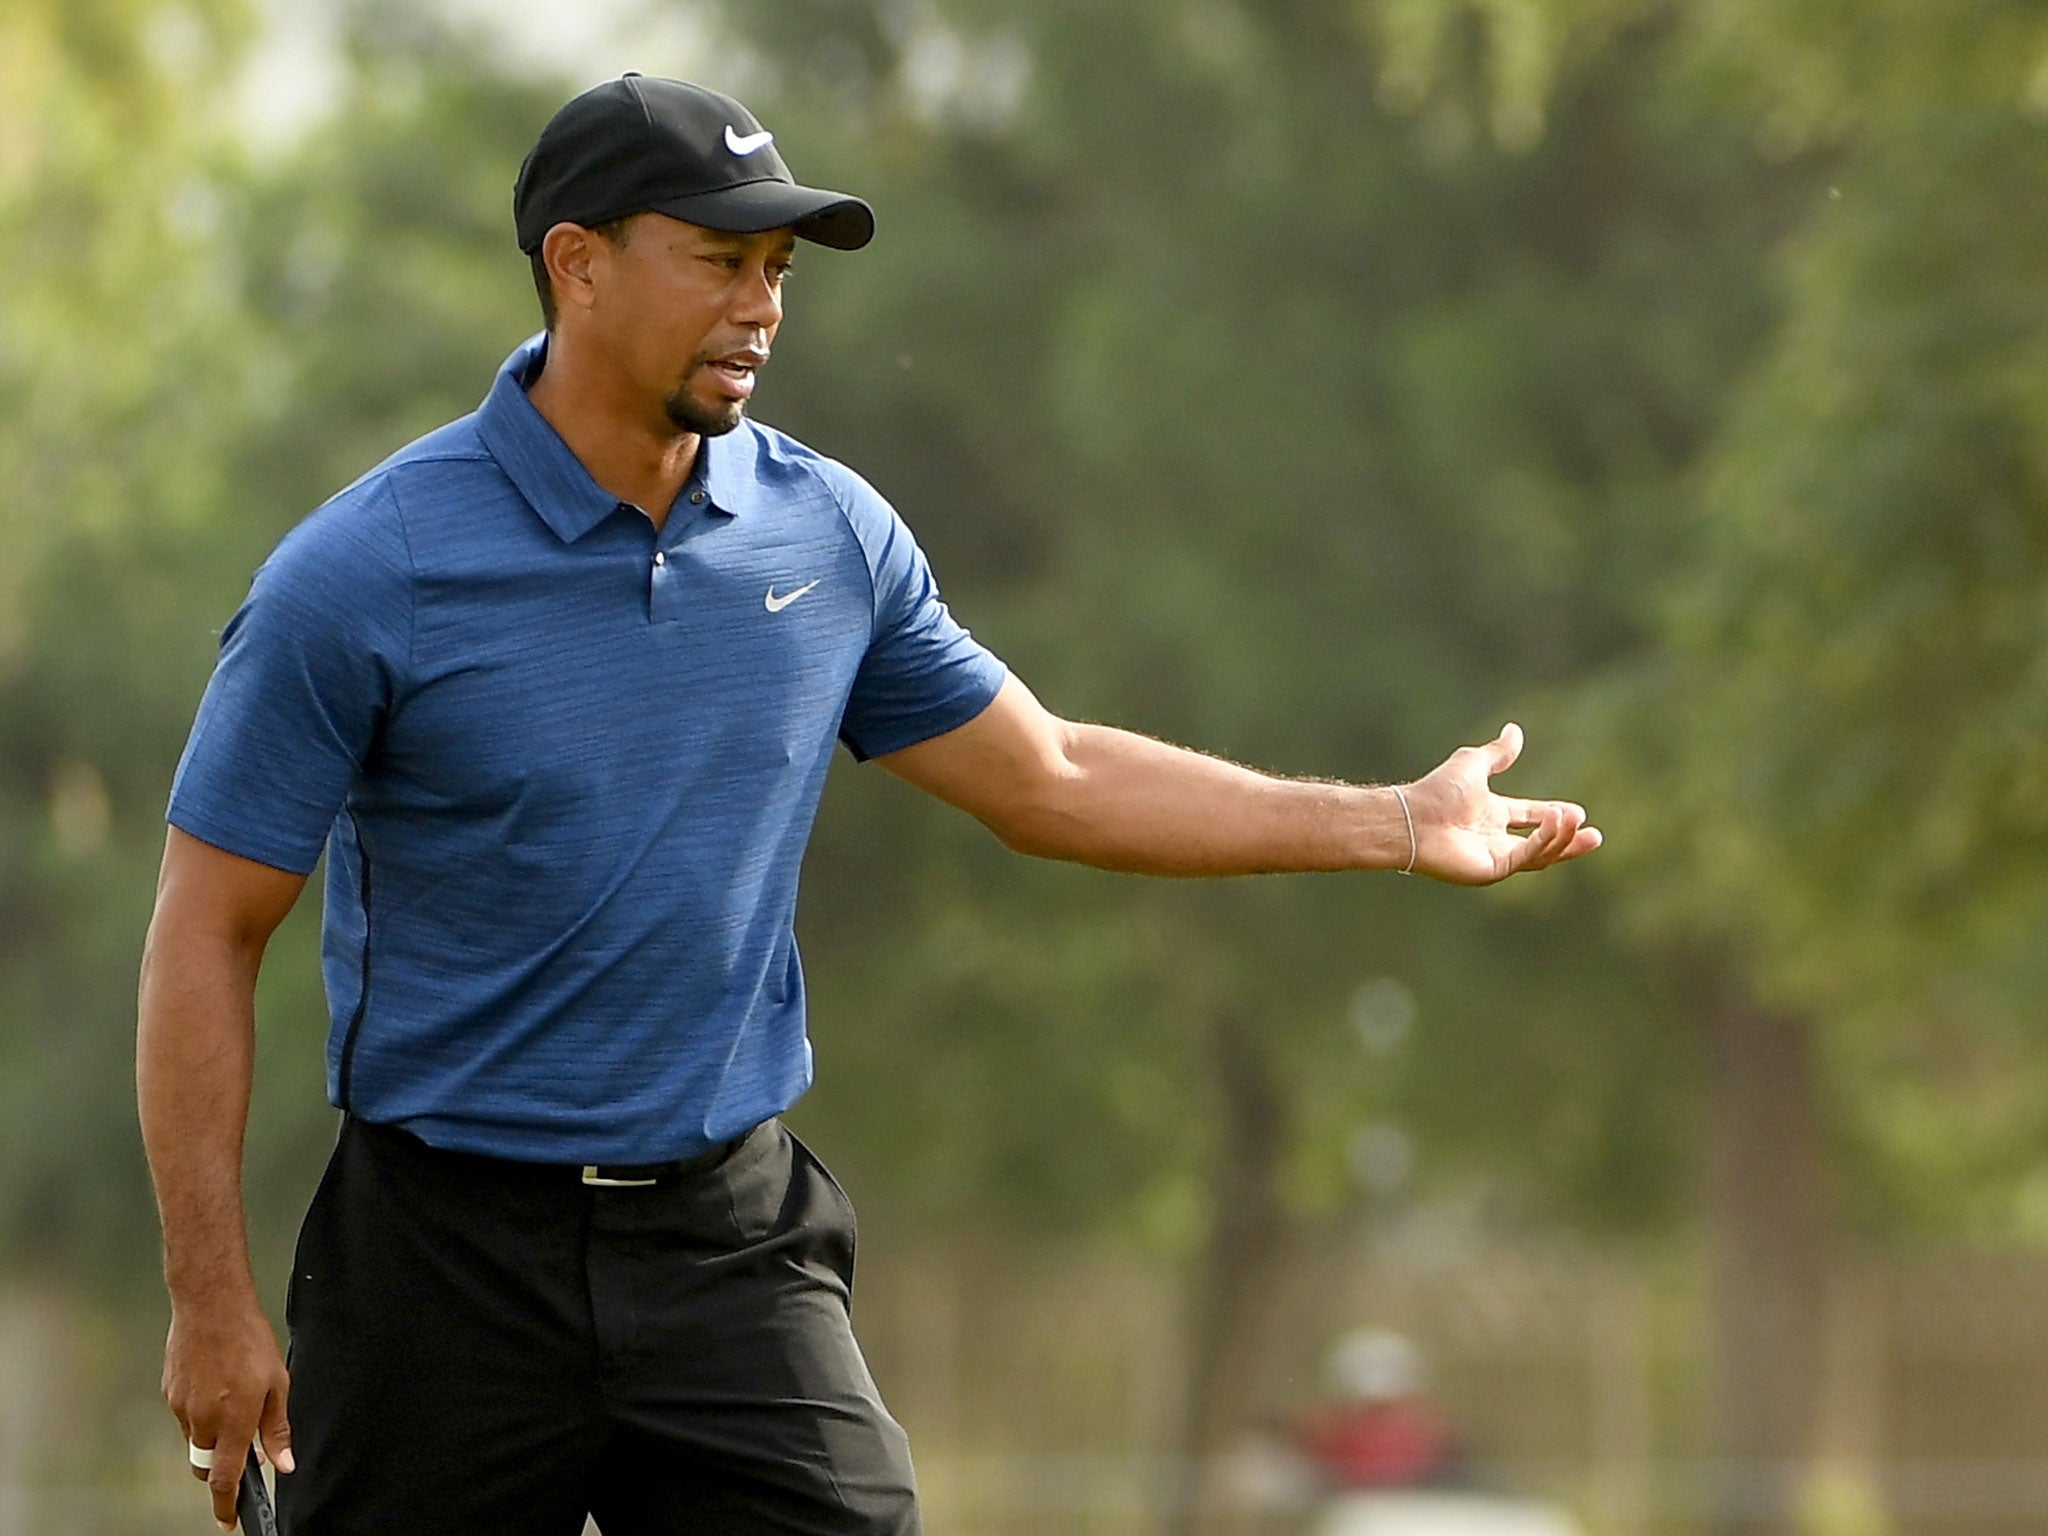 Tiger Woods will not play at the Masters as he continues to recover from his latest injury setback